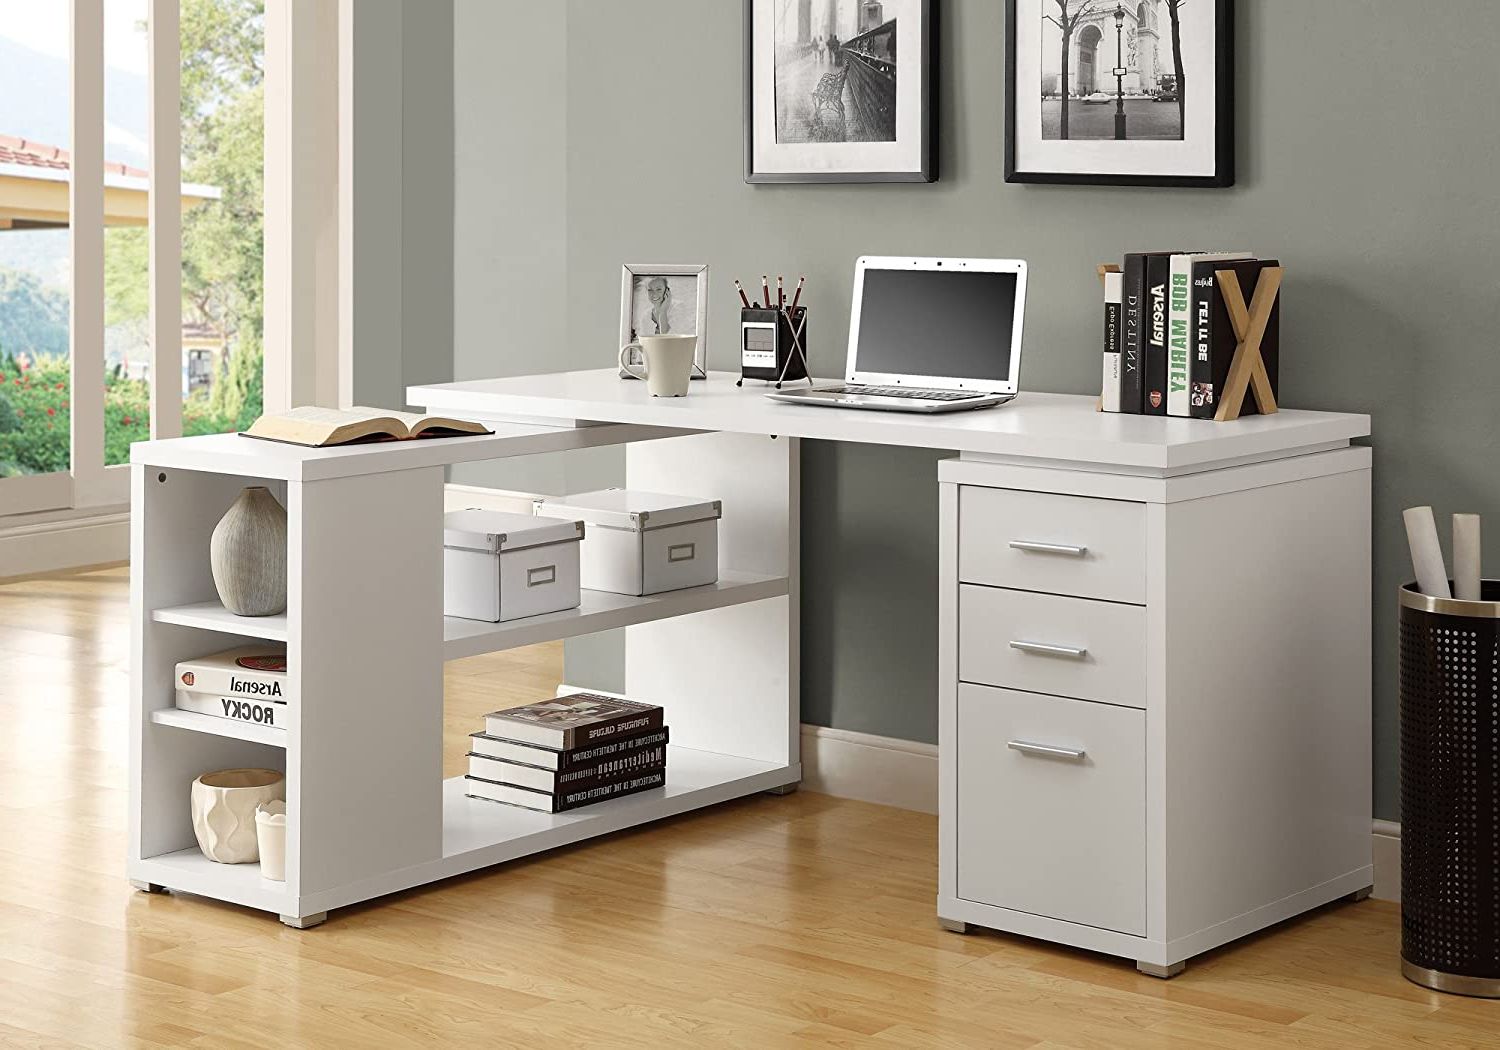 Is Computer Desk With File Cabinet Necessary? – Ideas For Home Office For 2019 Computer Desks With Filing Cabinet (View 10 of 15)